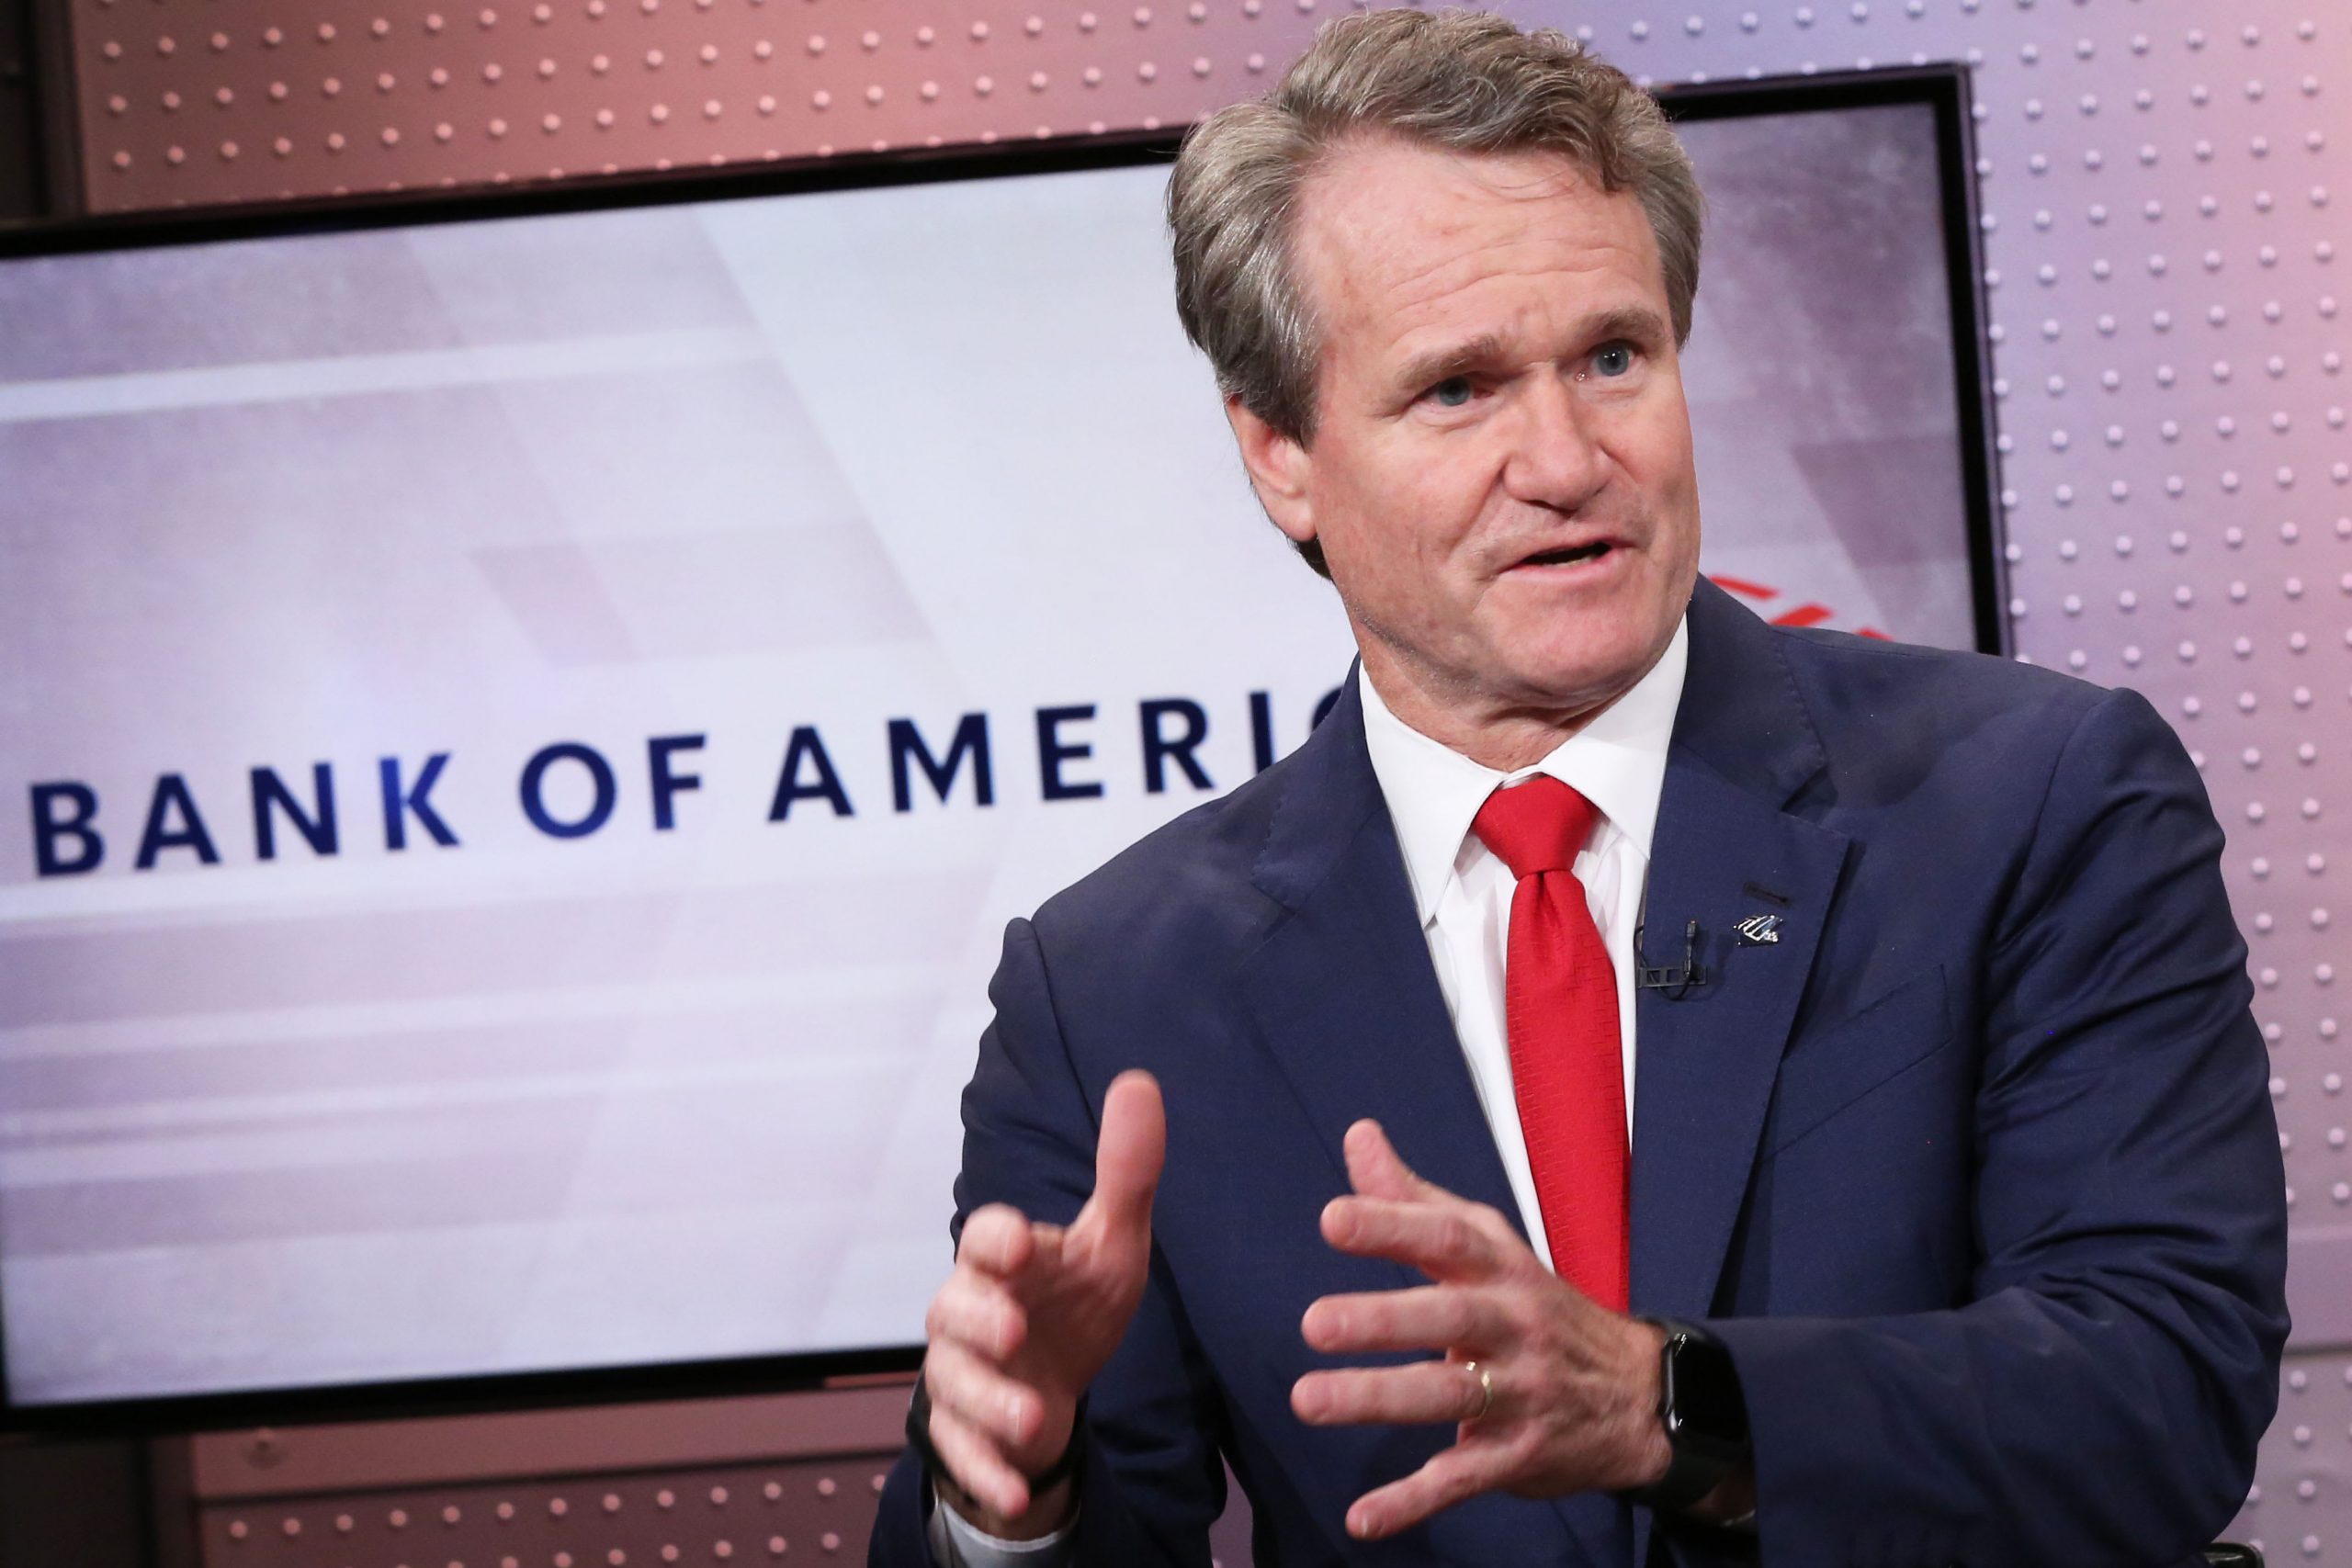 Bank of America's small business loan portal is up, making it the first